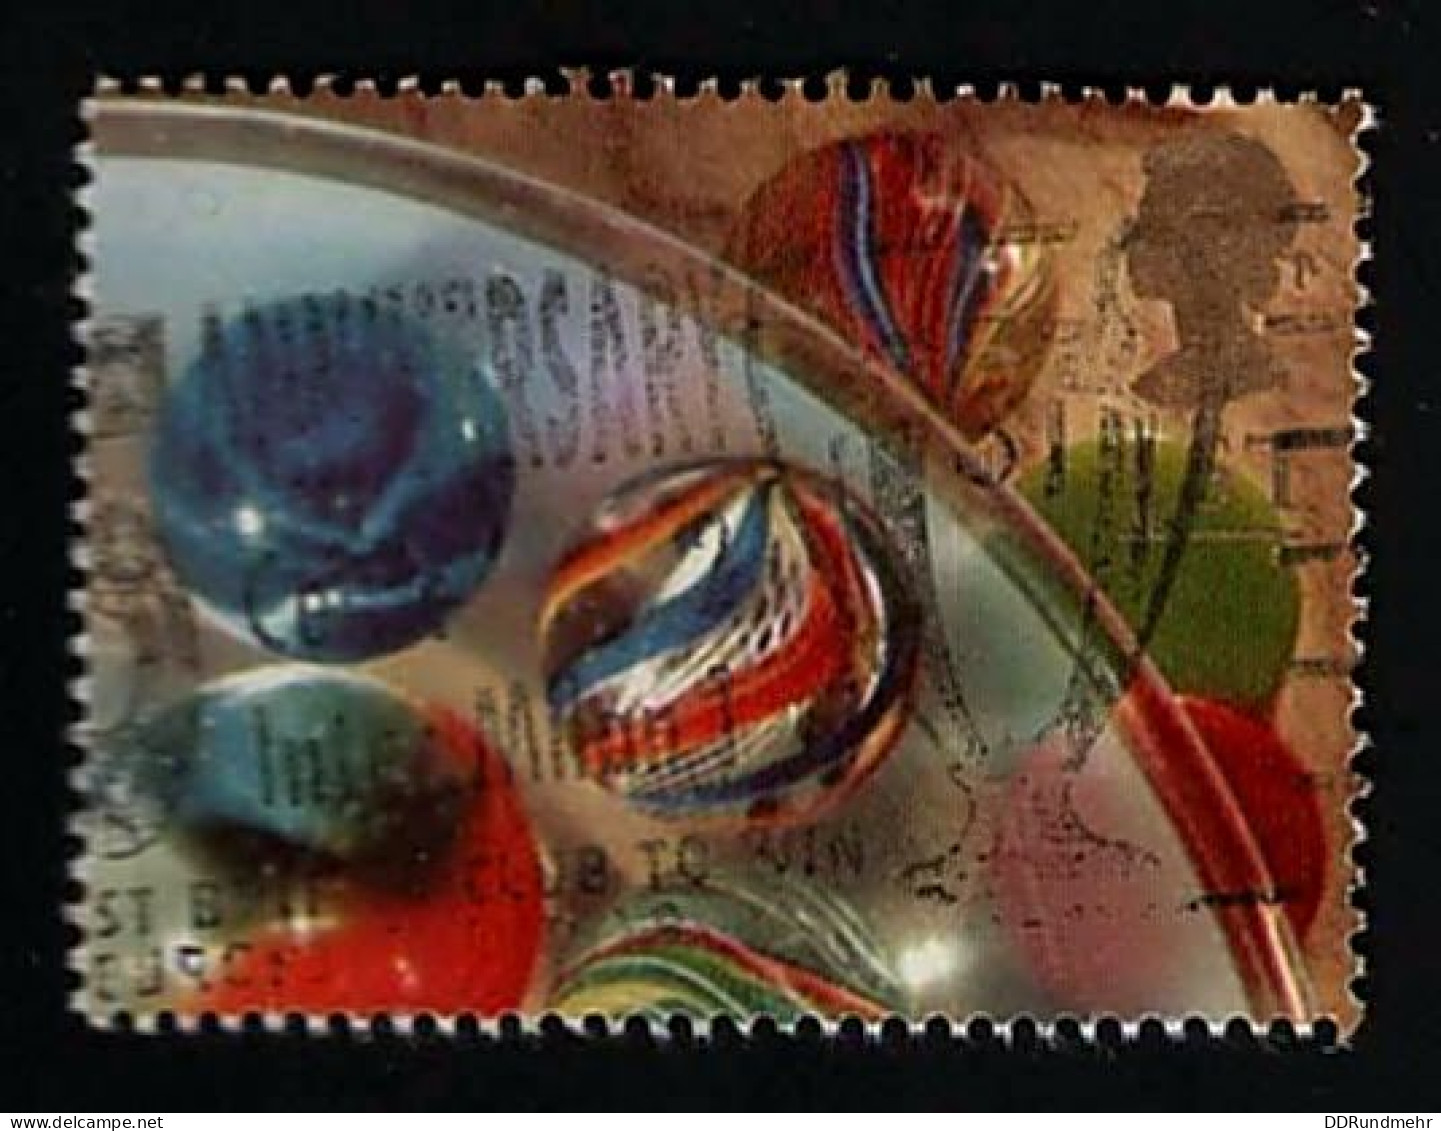 1992 Marbles Michel GB 1385 Stamp Number GB 1434 Yvert Et Tellier GB 1604 Stanley Gibbons GB 1600 AFA GB 1539 Used - Oblitérés